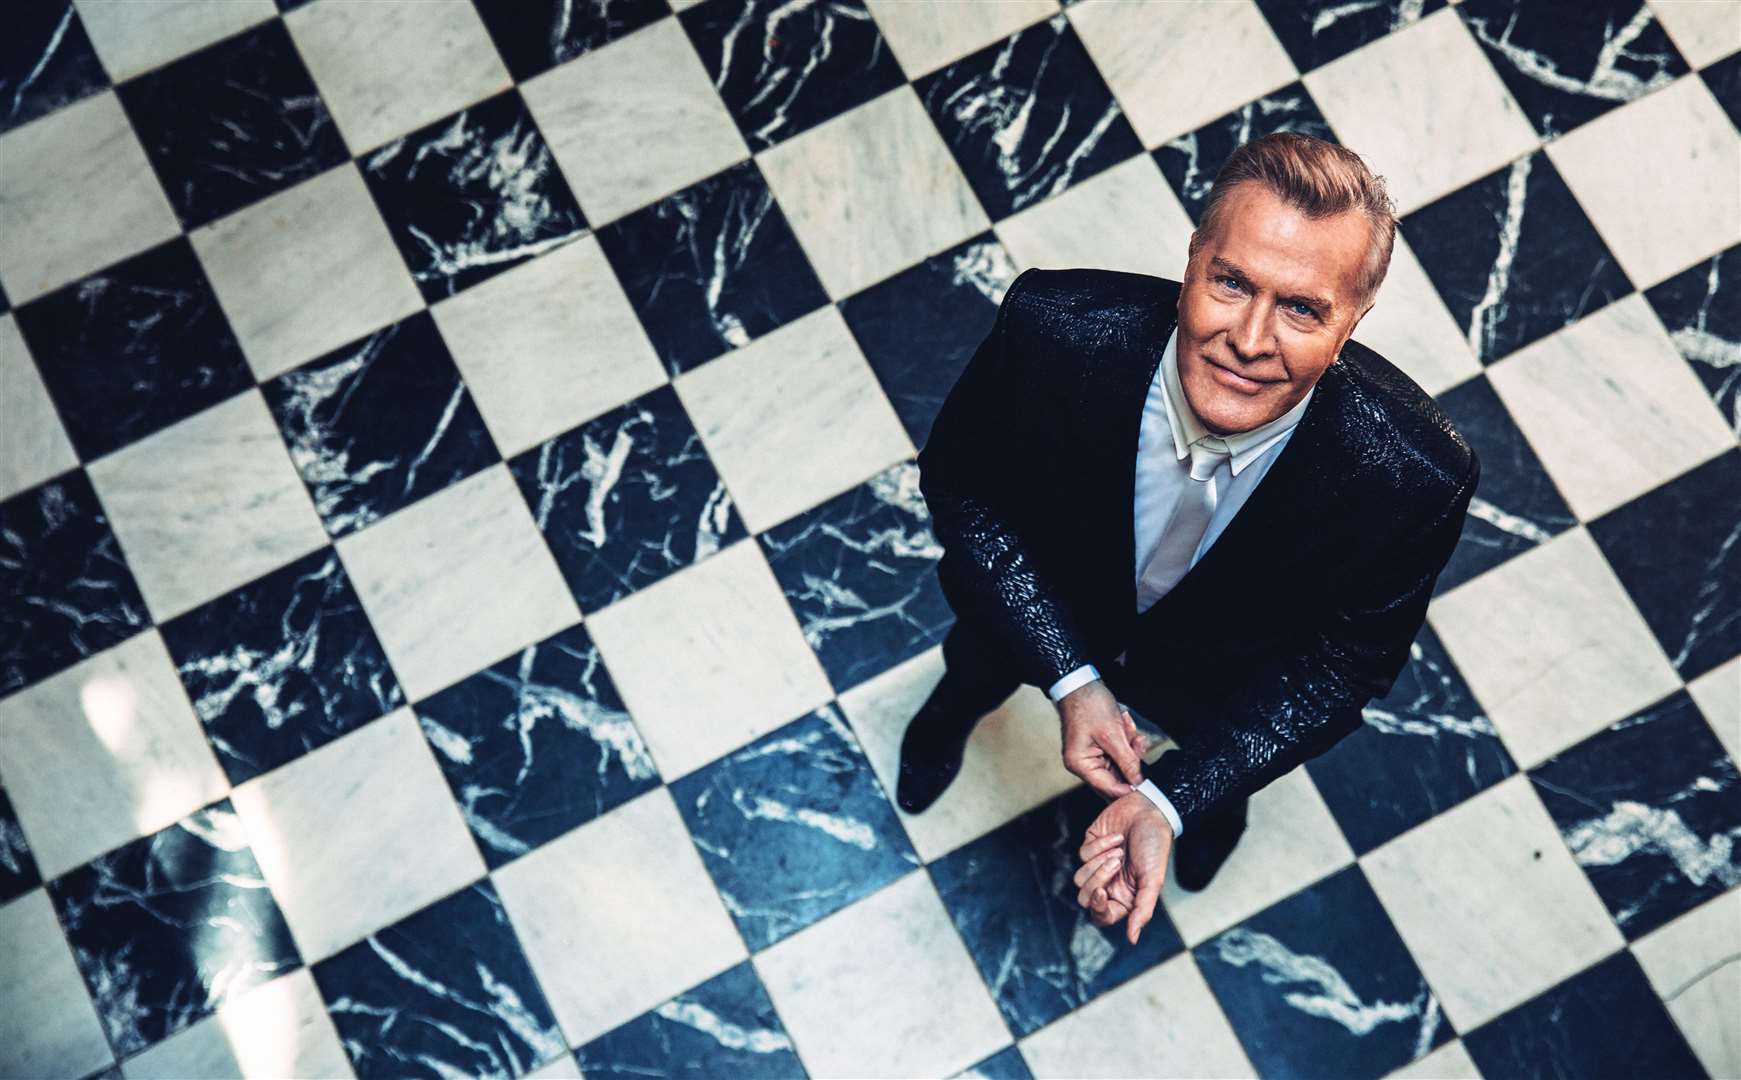 Martin Fry, whose band ABC will support Tears for Fears in Canterbury